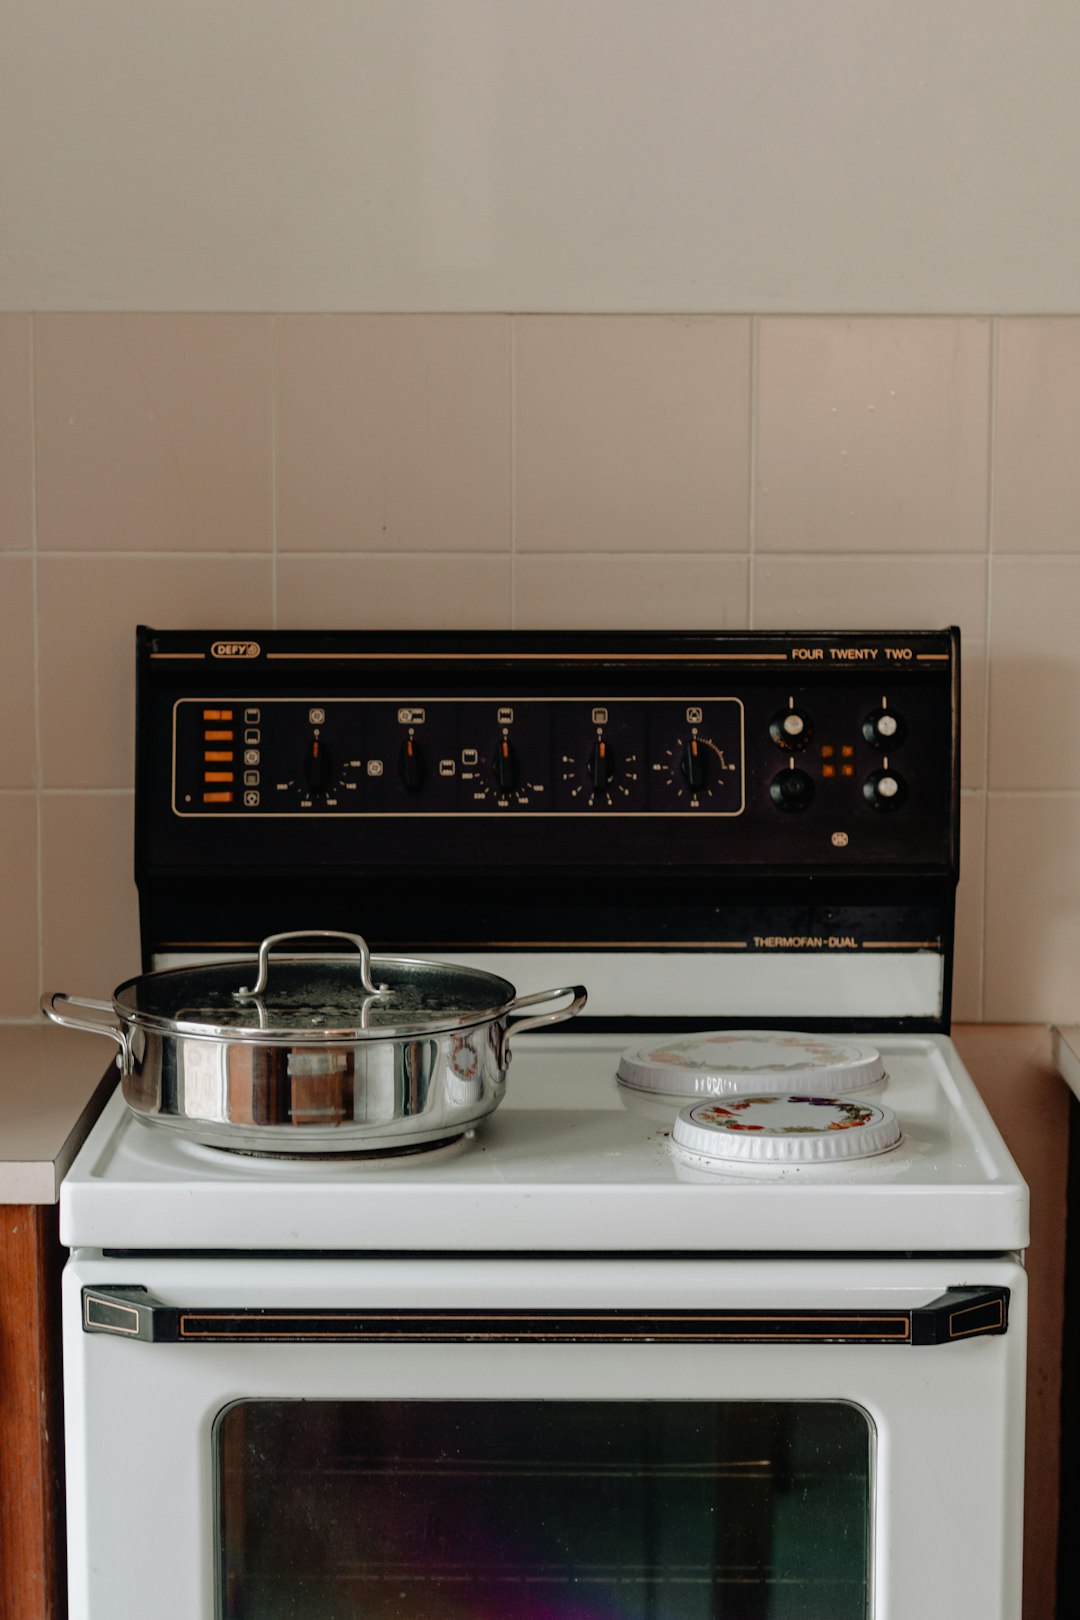  white and black induction stove oven